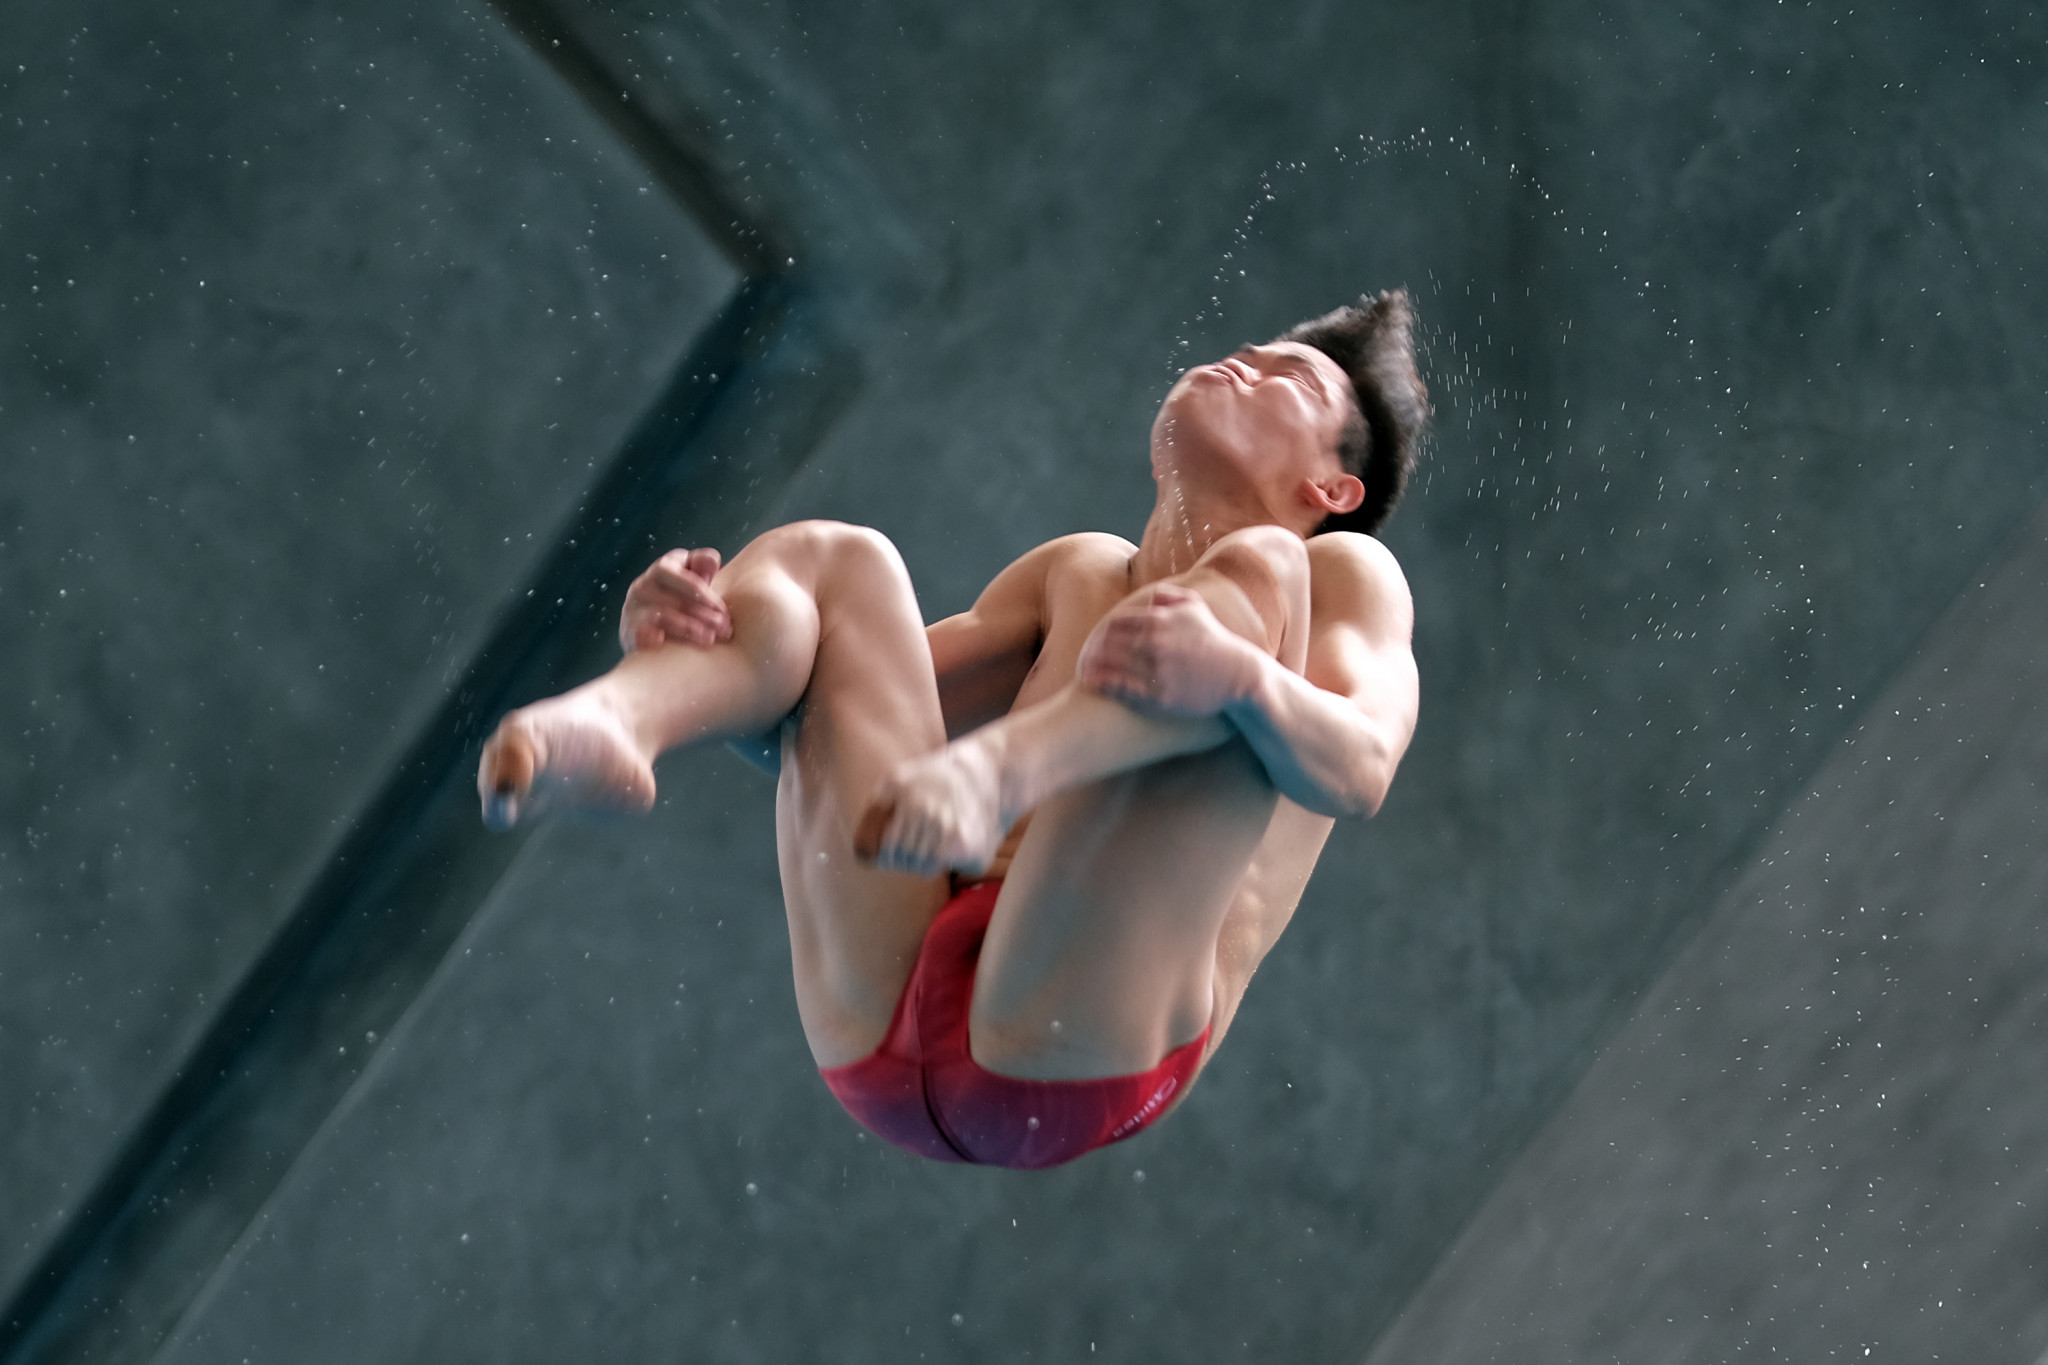 Tai Xiaohu impressed in the men's 3m springboard event ©Getty Images